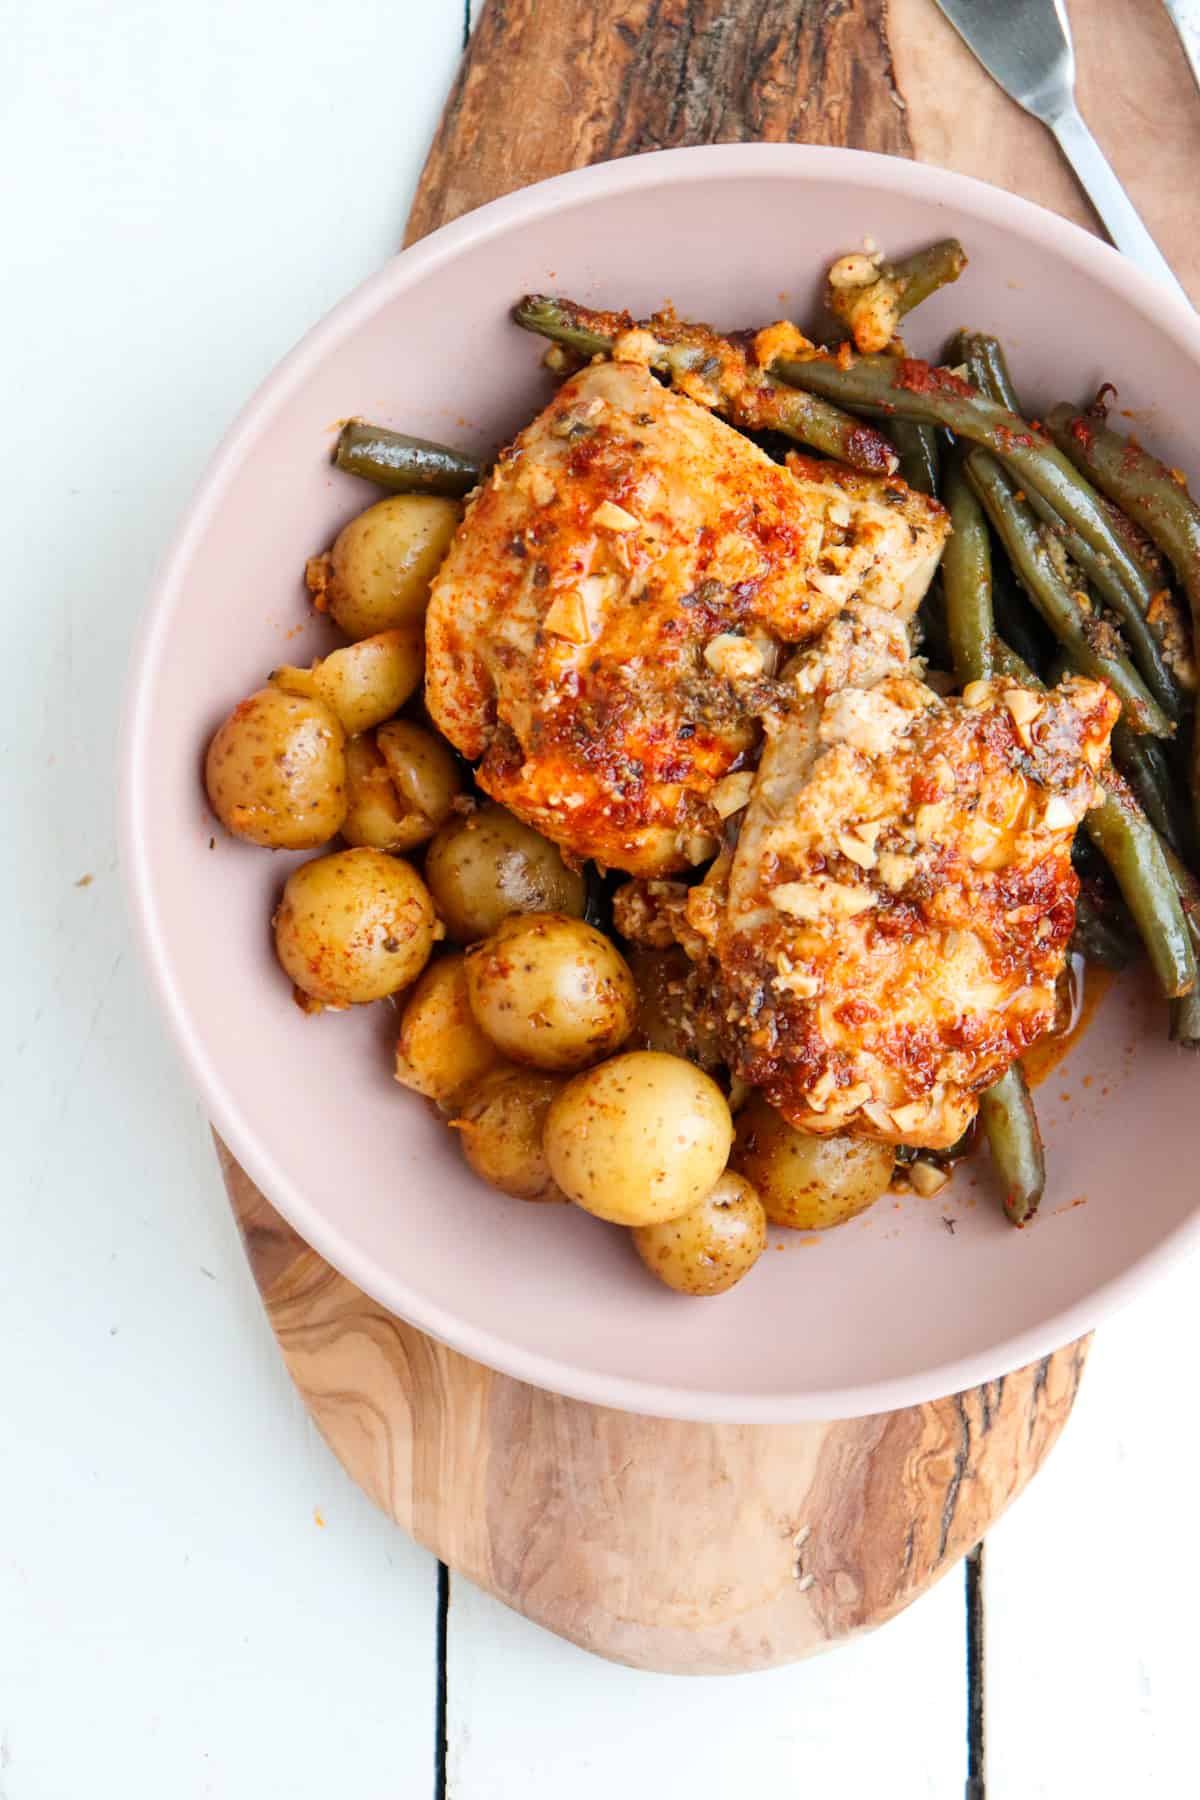 finished dish of potatoes, green beans, and two chicken thighs on top in a pink low bowl.